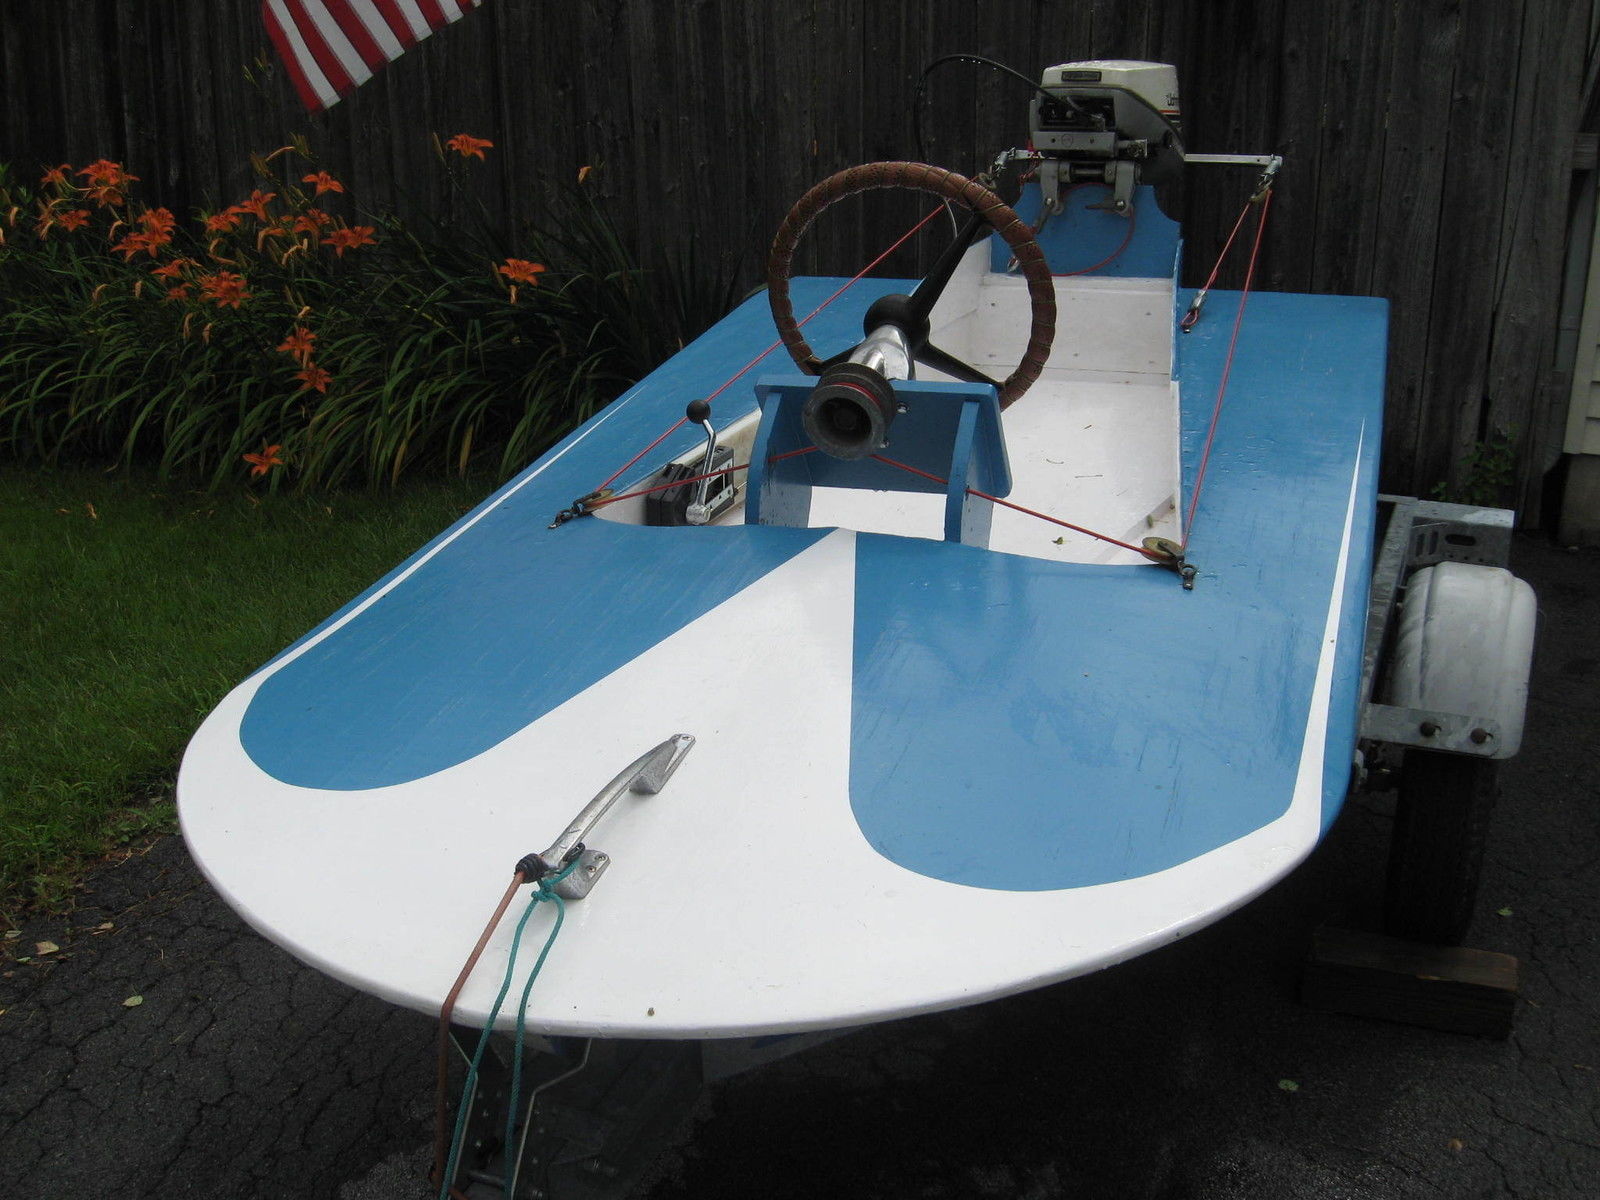 home built mini max hydroplane 2010 for sale for $350